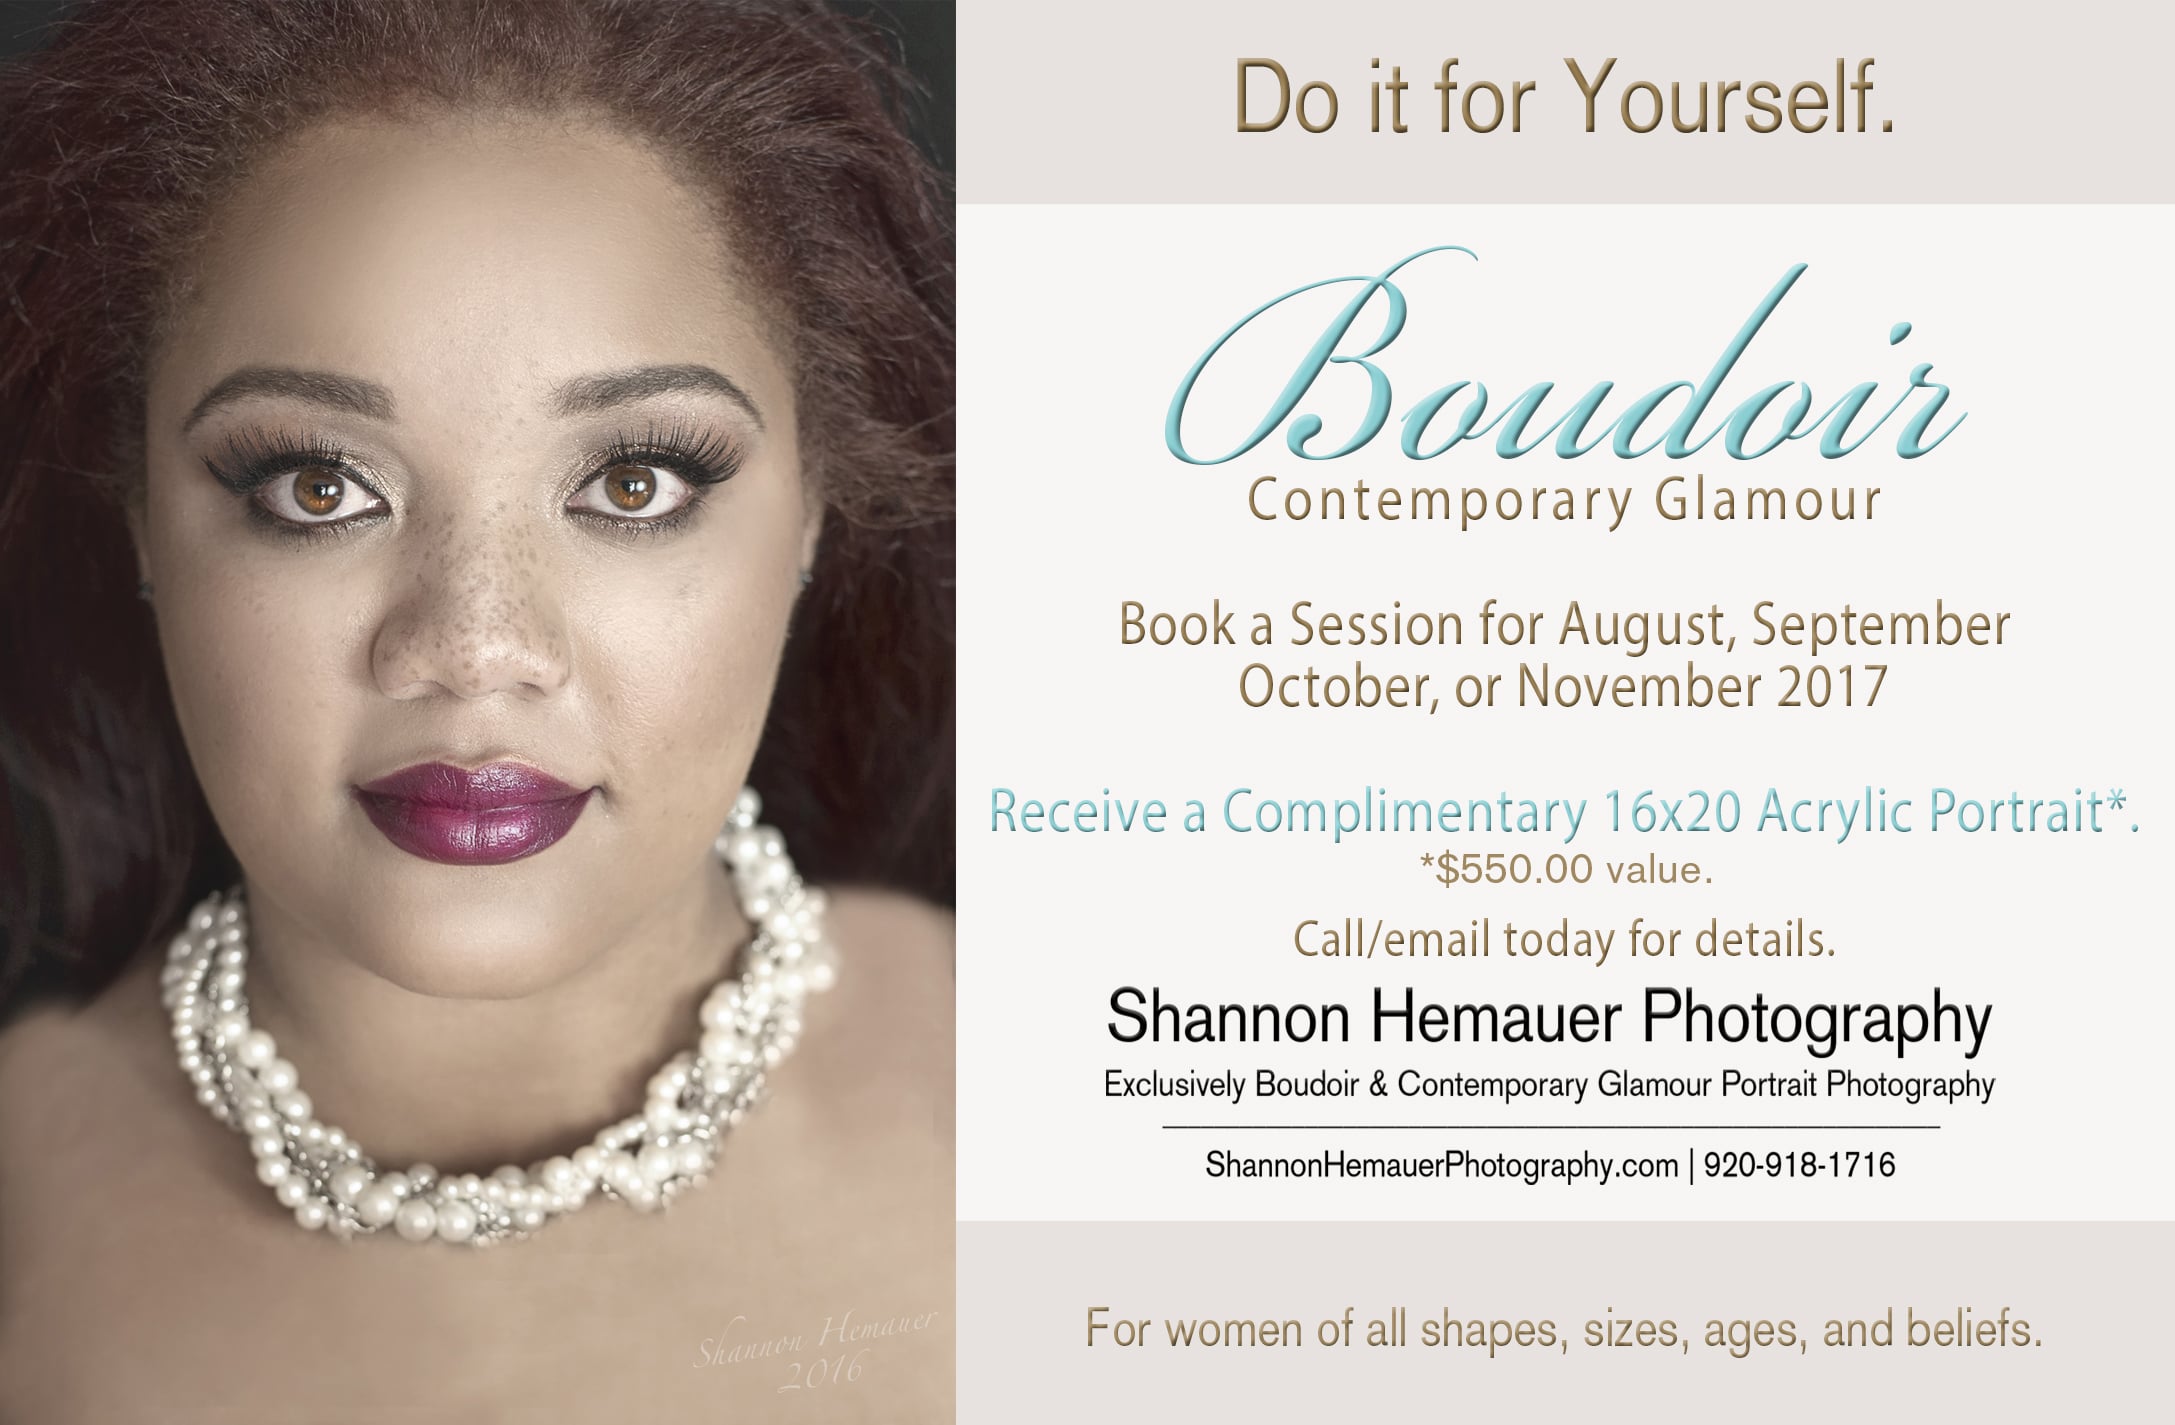 Boudoir and contemporary glamour portrait photographer Shannon Hemauer located near Harrisburg PA